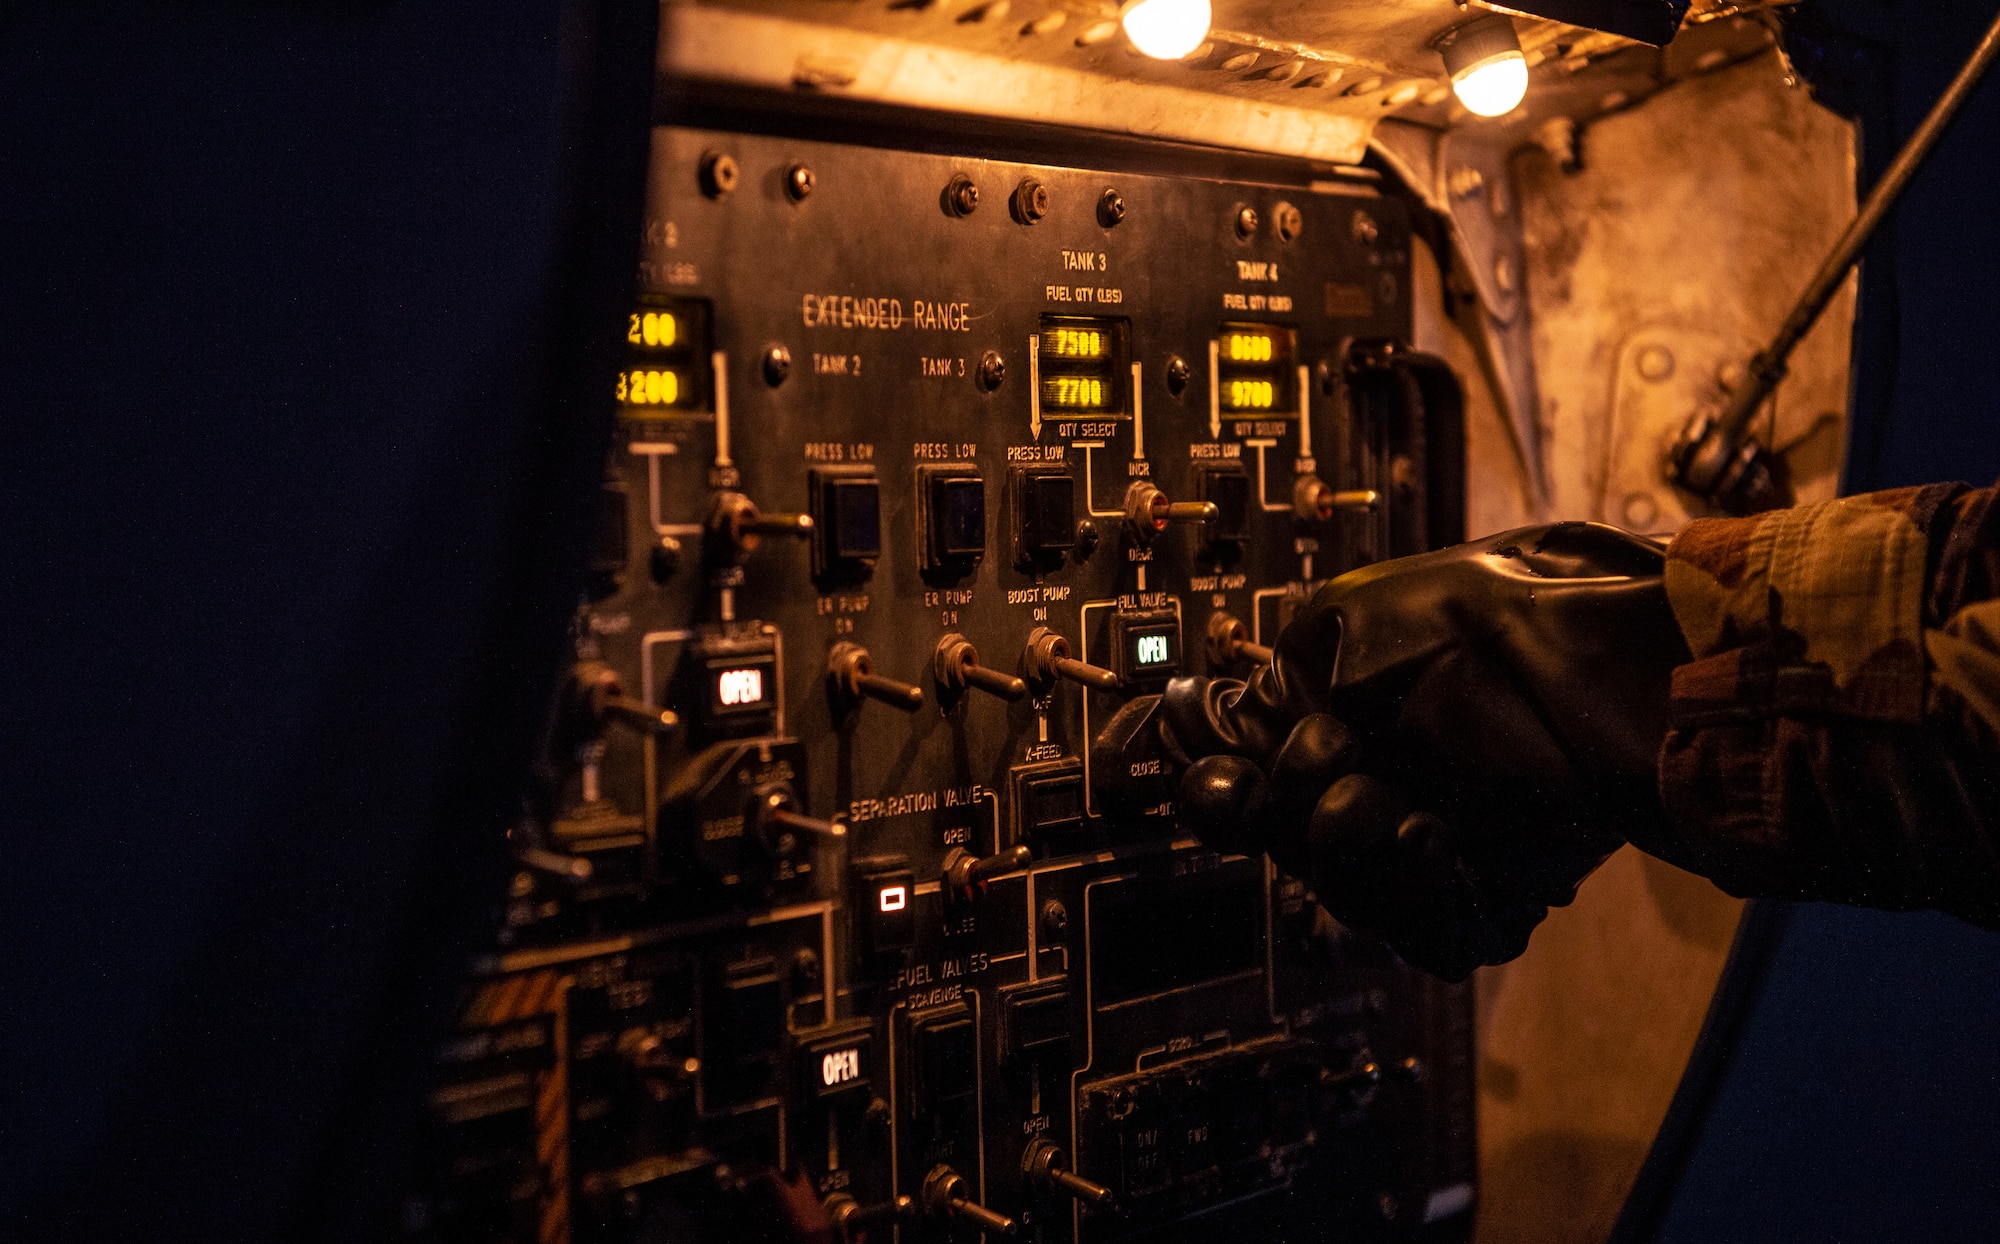 U.S. Air Force Senior Airman James Reed, 62nd Aircraft Maintenance Squadron maintainer,   adjusts a switch while refueling a C-17 Globemaster III during Exercise Rainier War 21B at Joint Base Lewis-McChord, Washington, Nov. 3, 2021. Rainier War 21B exercises and evaluates the wing’s ability to employ the force and their ability to perform during wartime and/or contingency taskings in a high-intensity, wartime contested, degraded and operationally limited environment while supporting the contingency operations against a near-peer adversary in the U.S. Indo-Pacific Command area of responsibility. (U.S. Air Force photo by Staff Sgt. Tryphena Mayhugh)